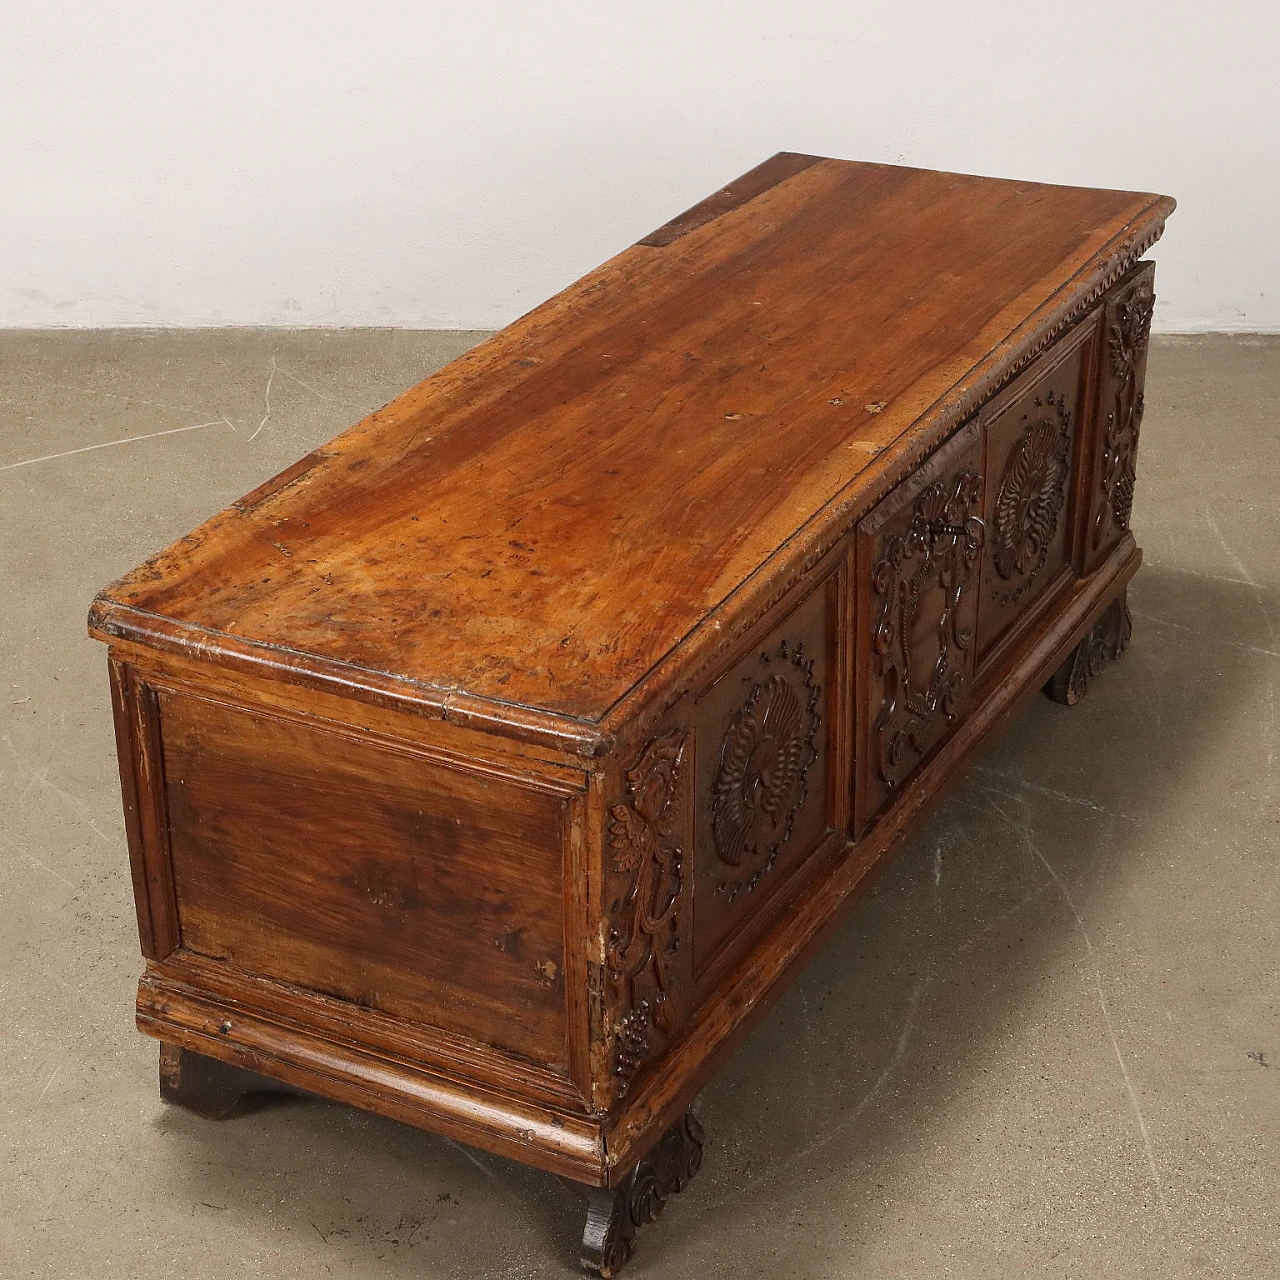 Carved walnut chest with double shelf feet, 18th century 10